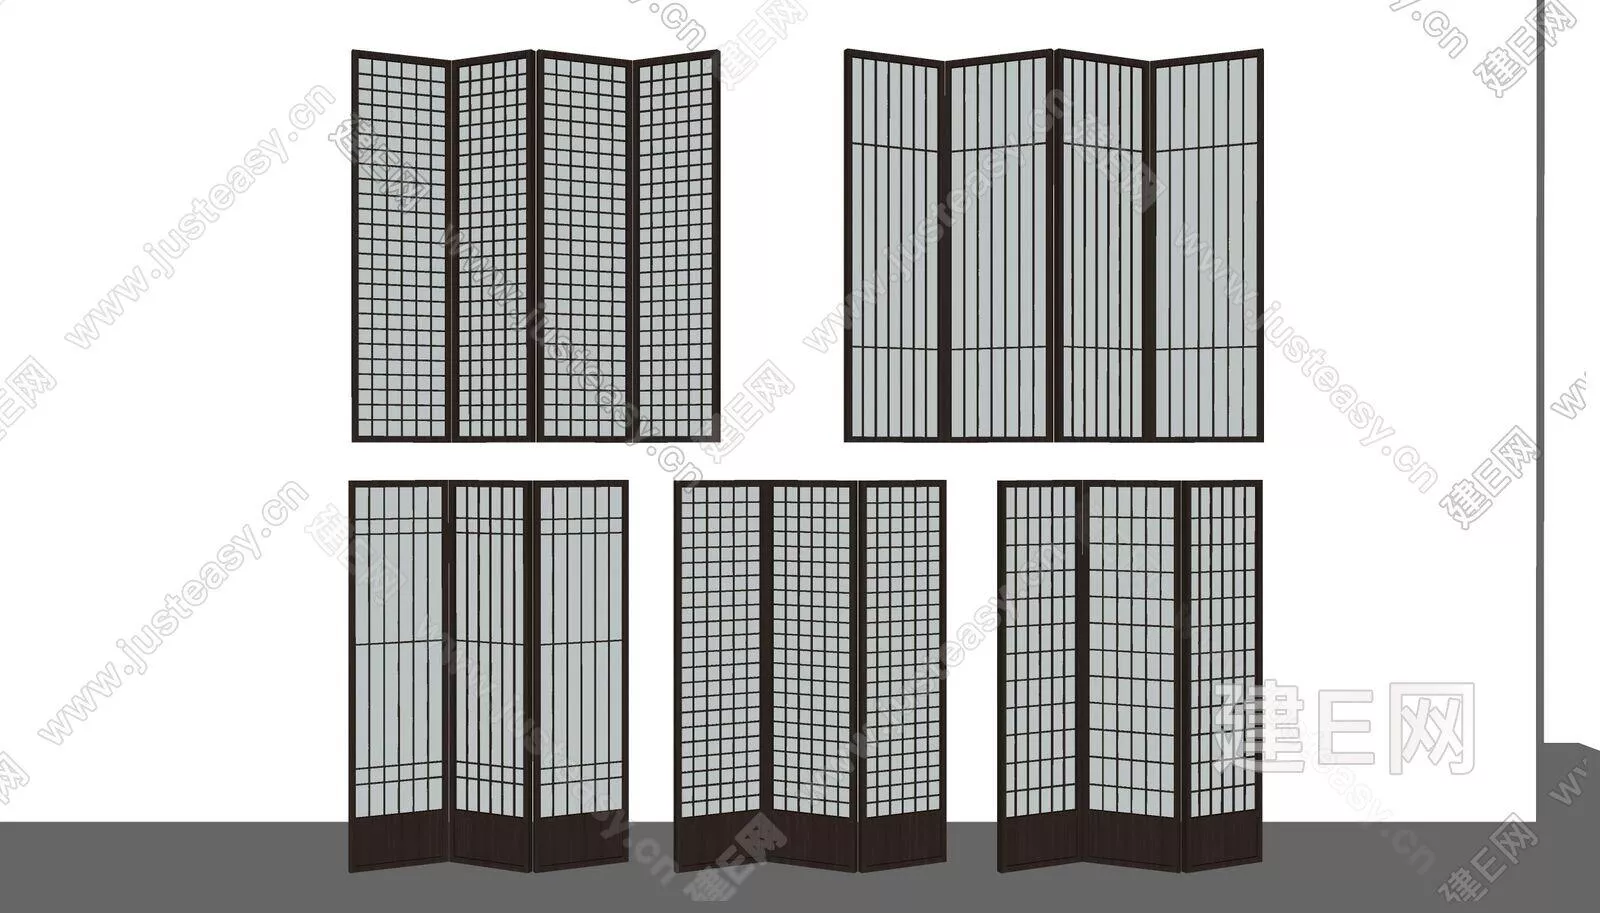 CHINESE PARTITION SCREEN - SKETCHUP 3D MODEL - ENSCAPE - 112214477